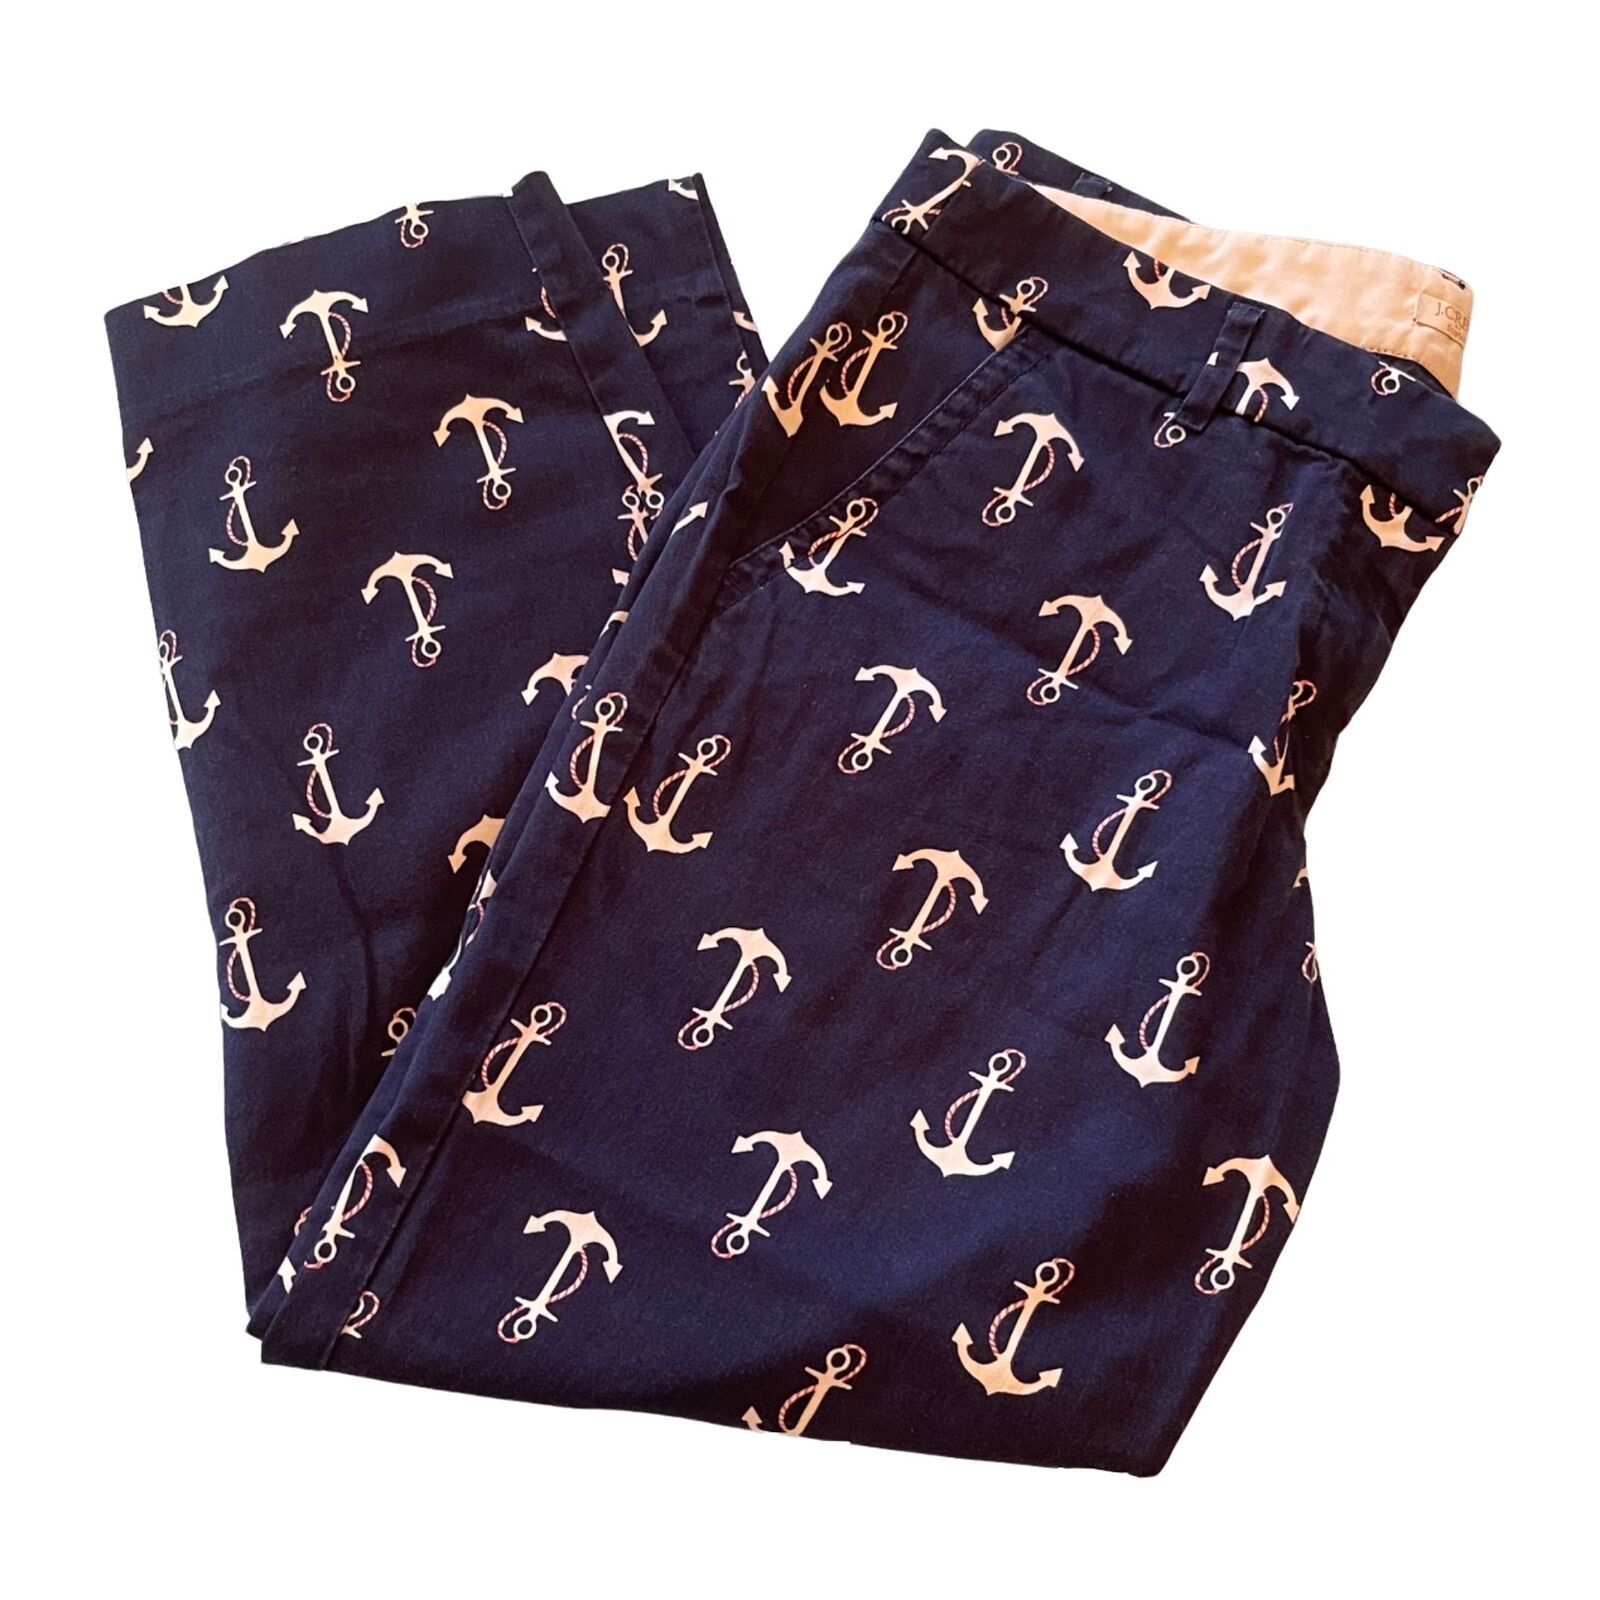 Primary image for J Crew Women's Capris Pants Size 6 White Anchor Pattern on Navy Blue